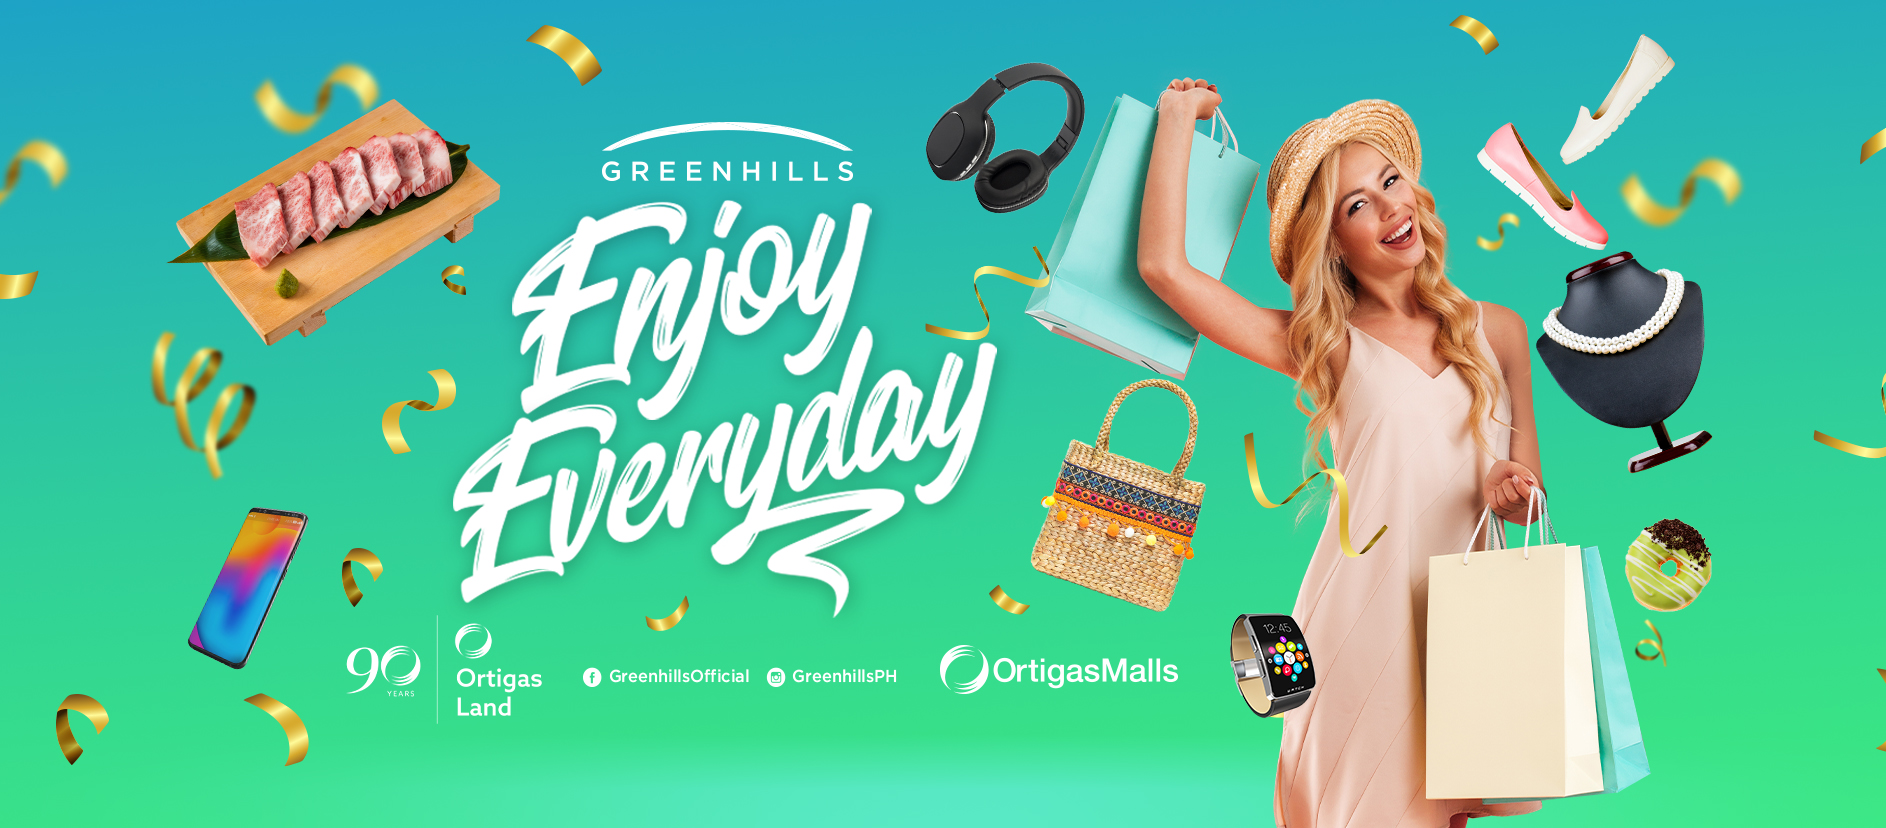 The Greenhills Virtual Mall Directory